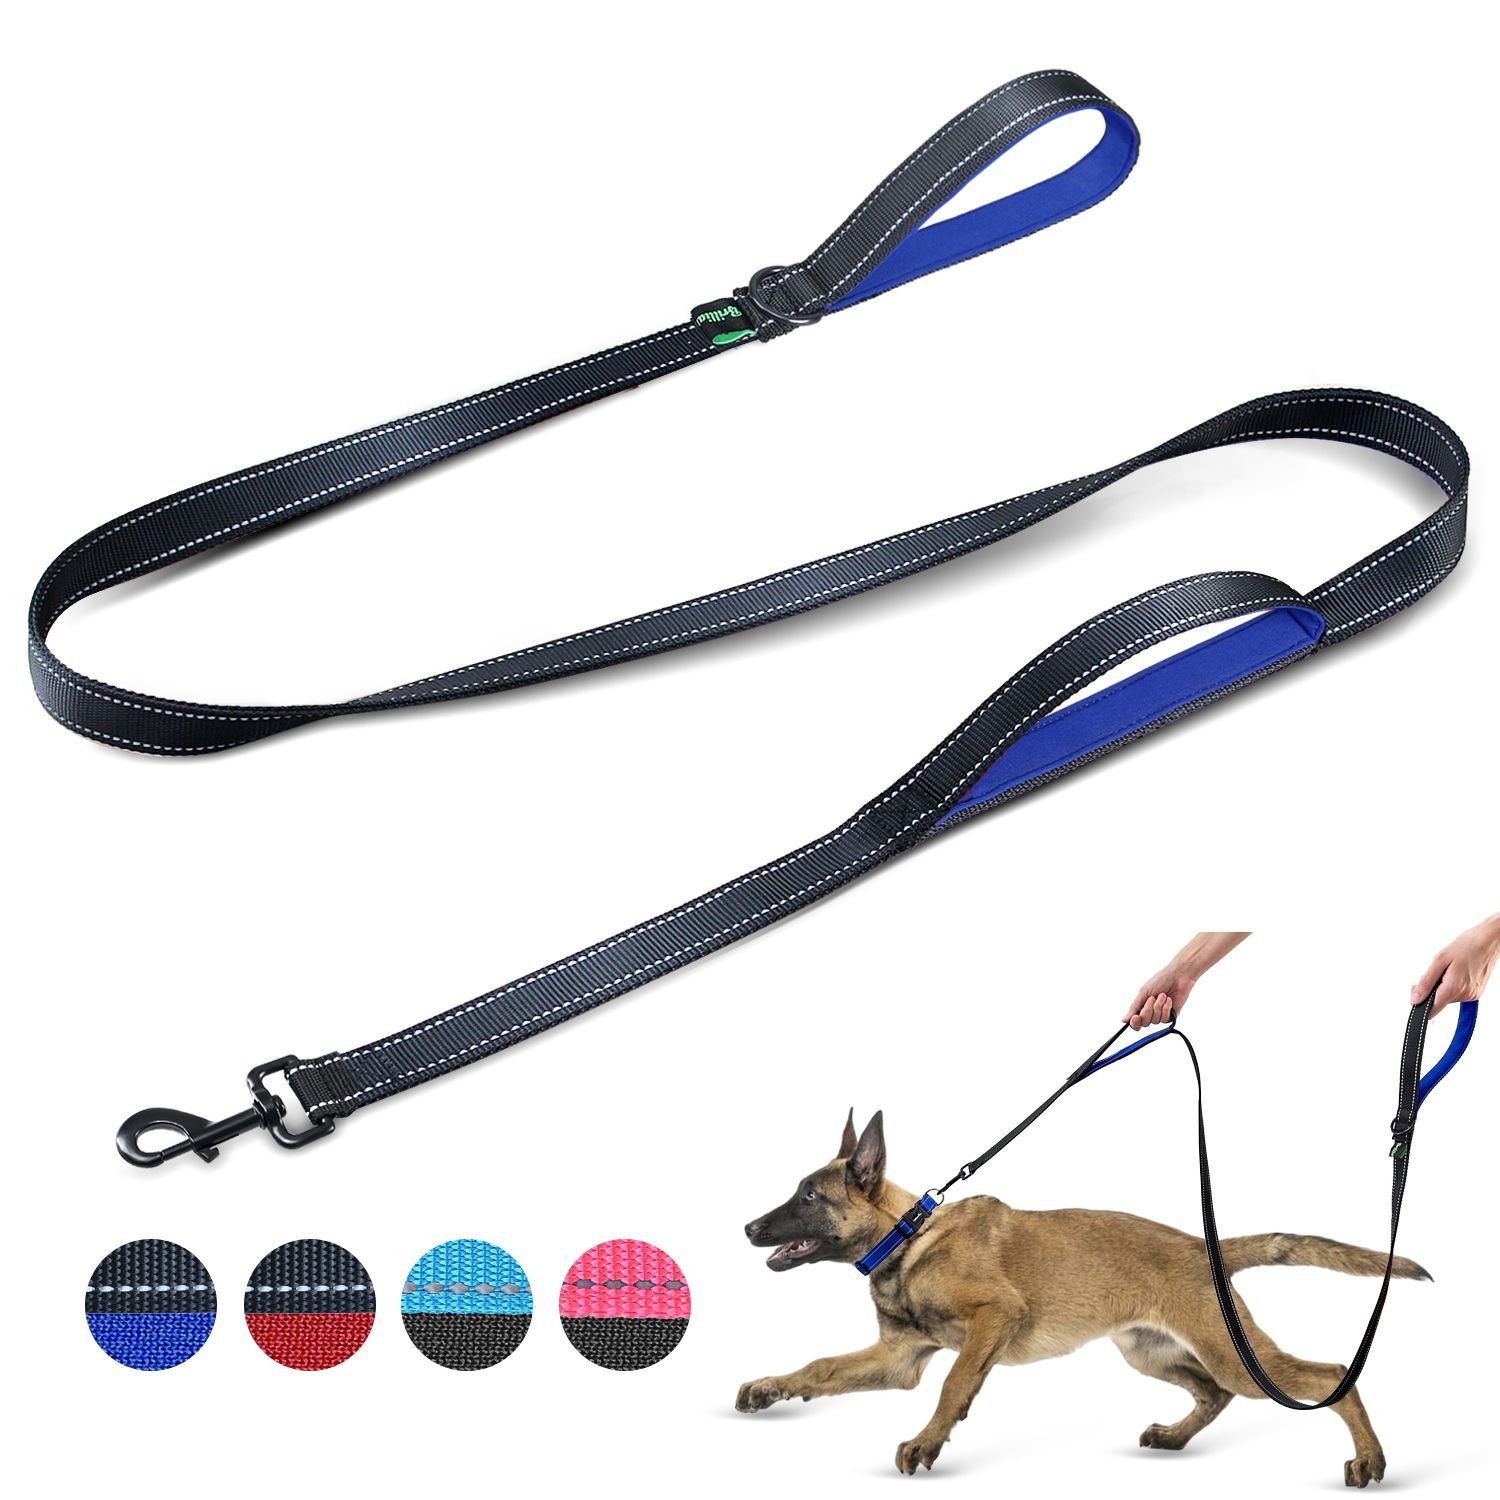 Reflective Walking Lead For Lage Dog